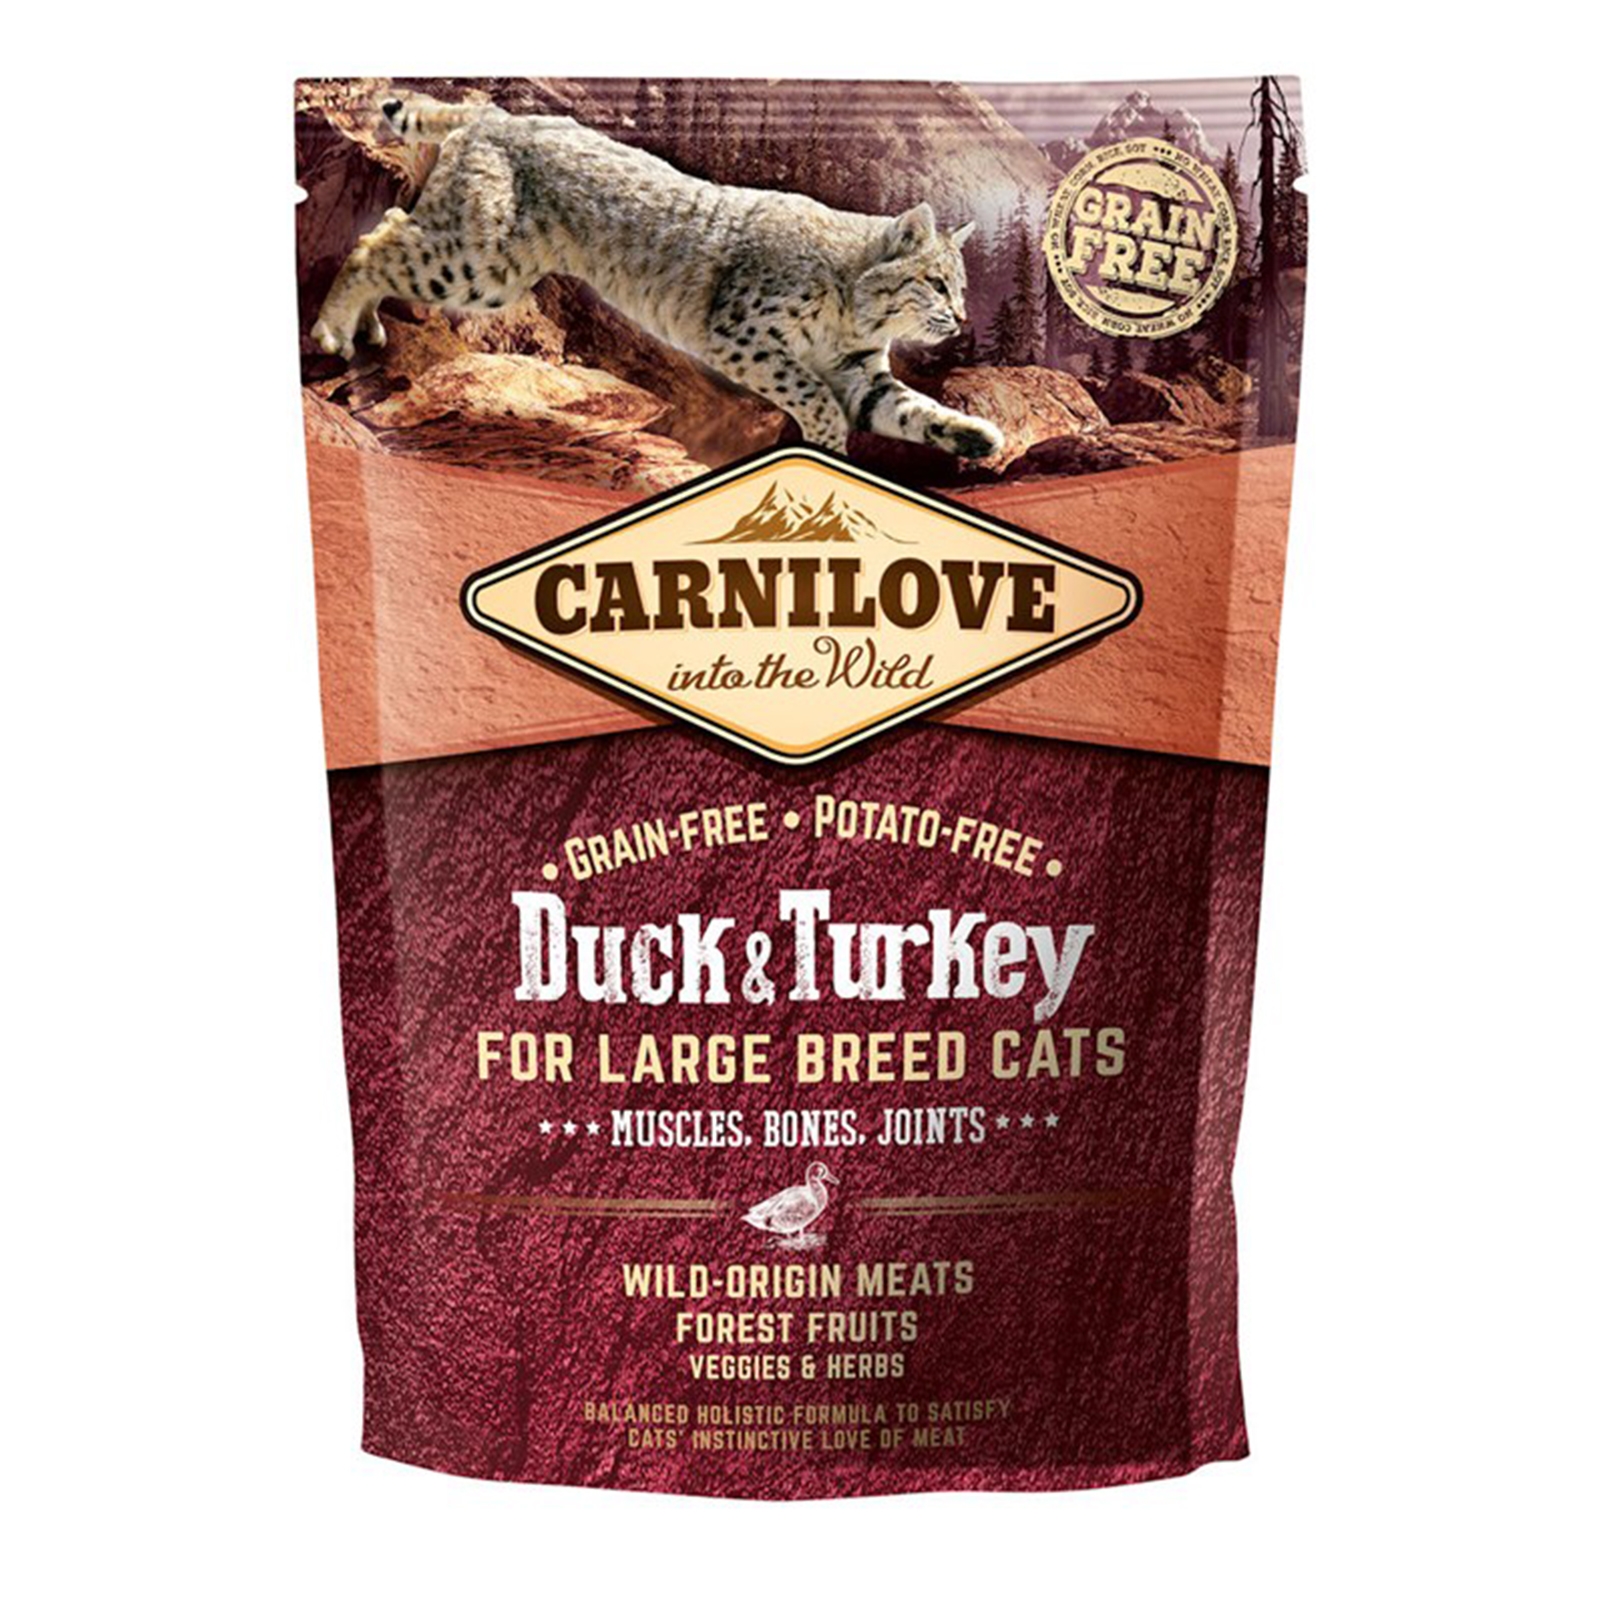 Carnilove Duck and Turkey for Large Breed Cats, 400 g Carnilove imagine 2022